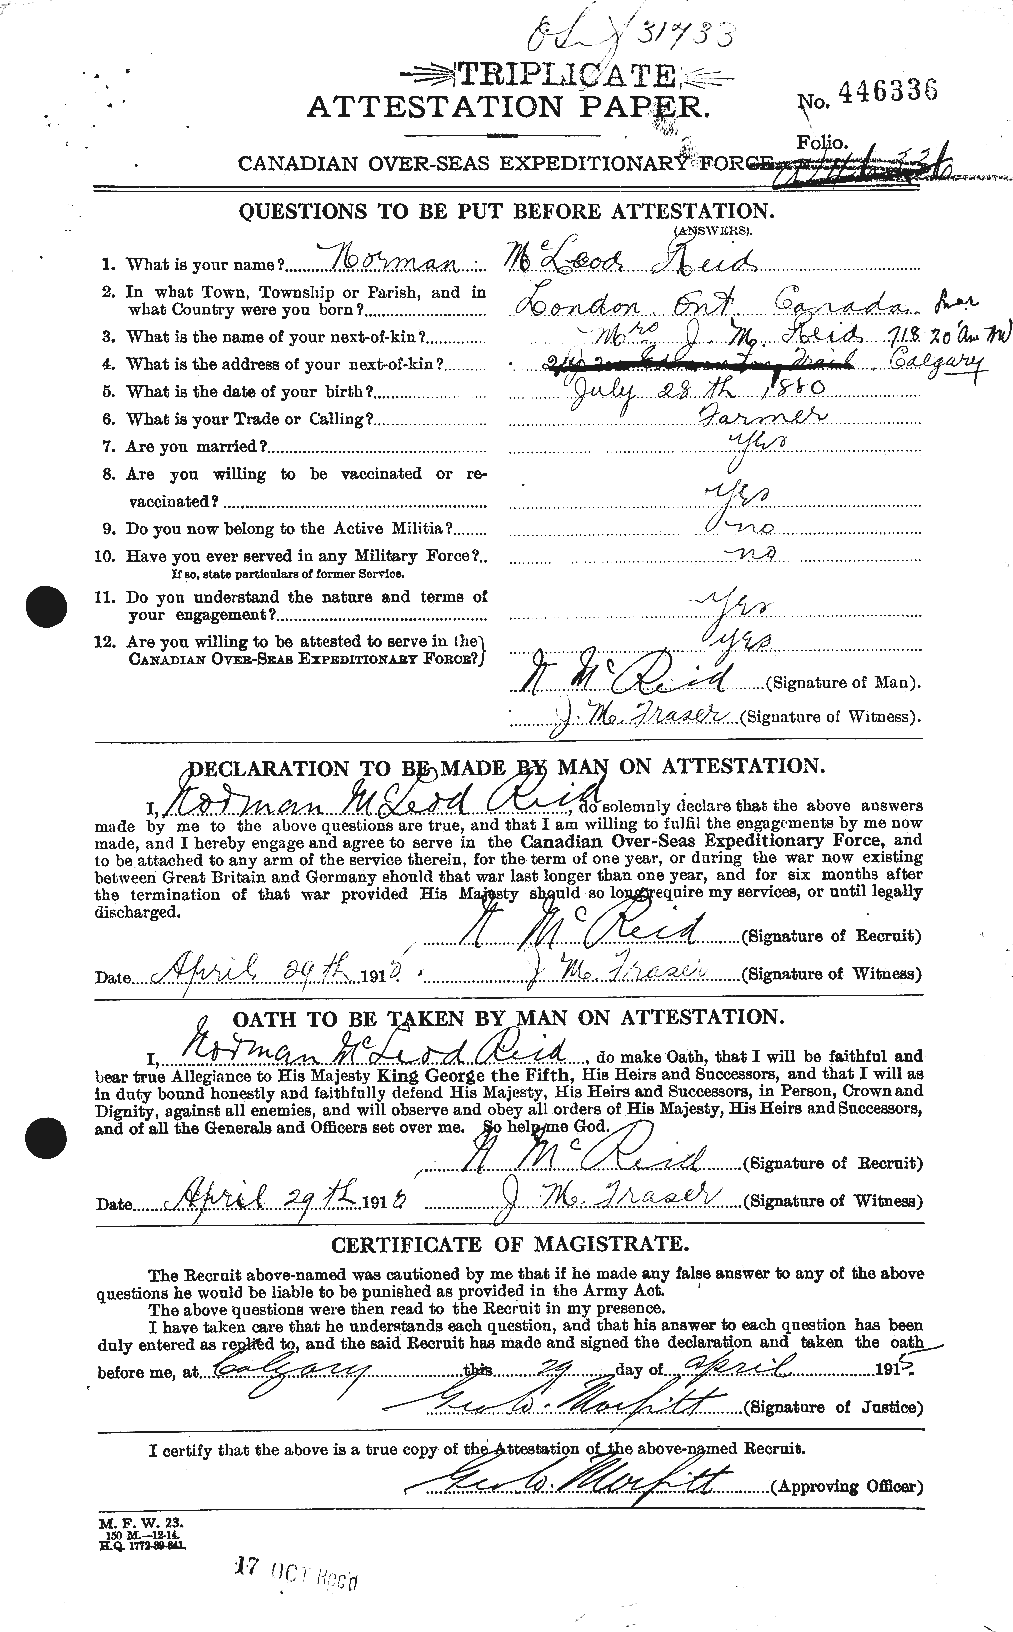 Personnel Records of the First World War - CEF 598966a